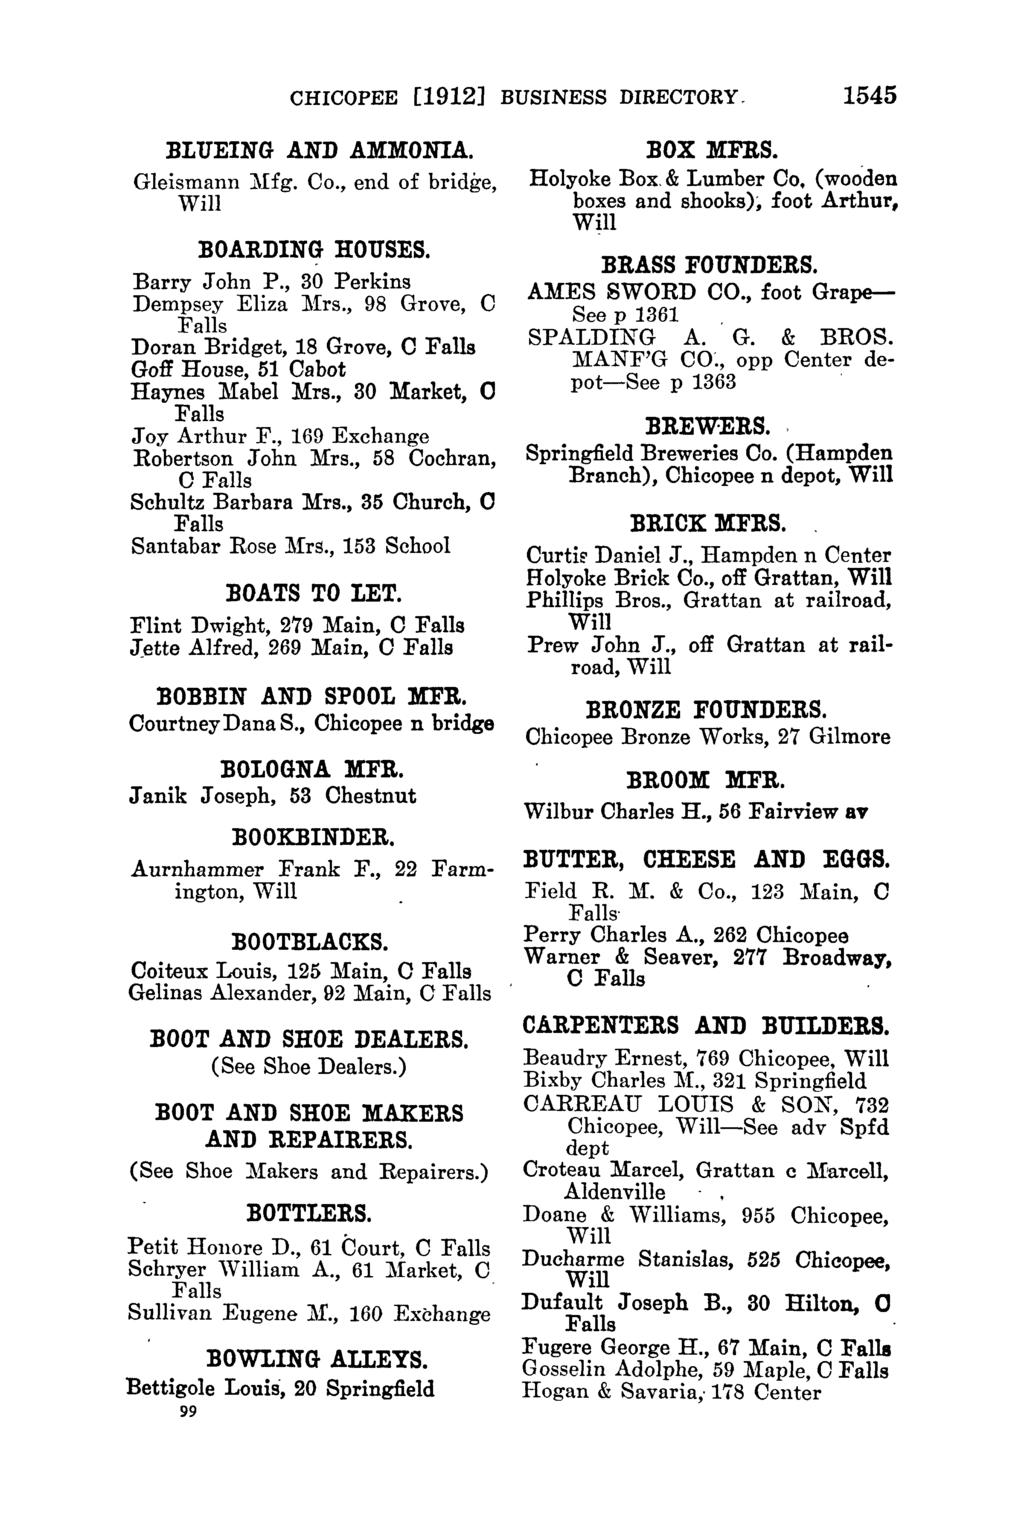 CHICOPEE [1912] BUSINESS DIRECTORY" 1545 BLUEING AND AMMONIA. Gleismann :Mfg. Co., end of bridge ' BOARDING HOUSES. Barry John P., 30 Perkins Dempsey Eliza J\i:rs.